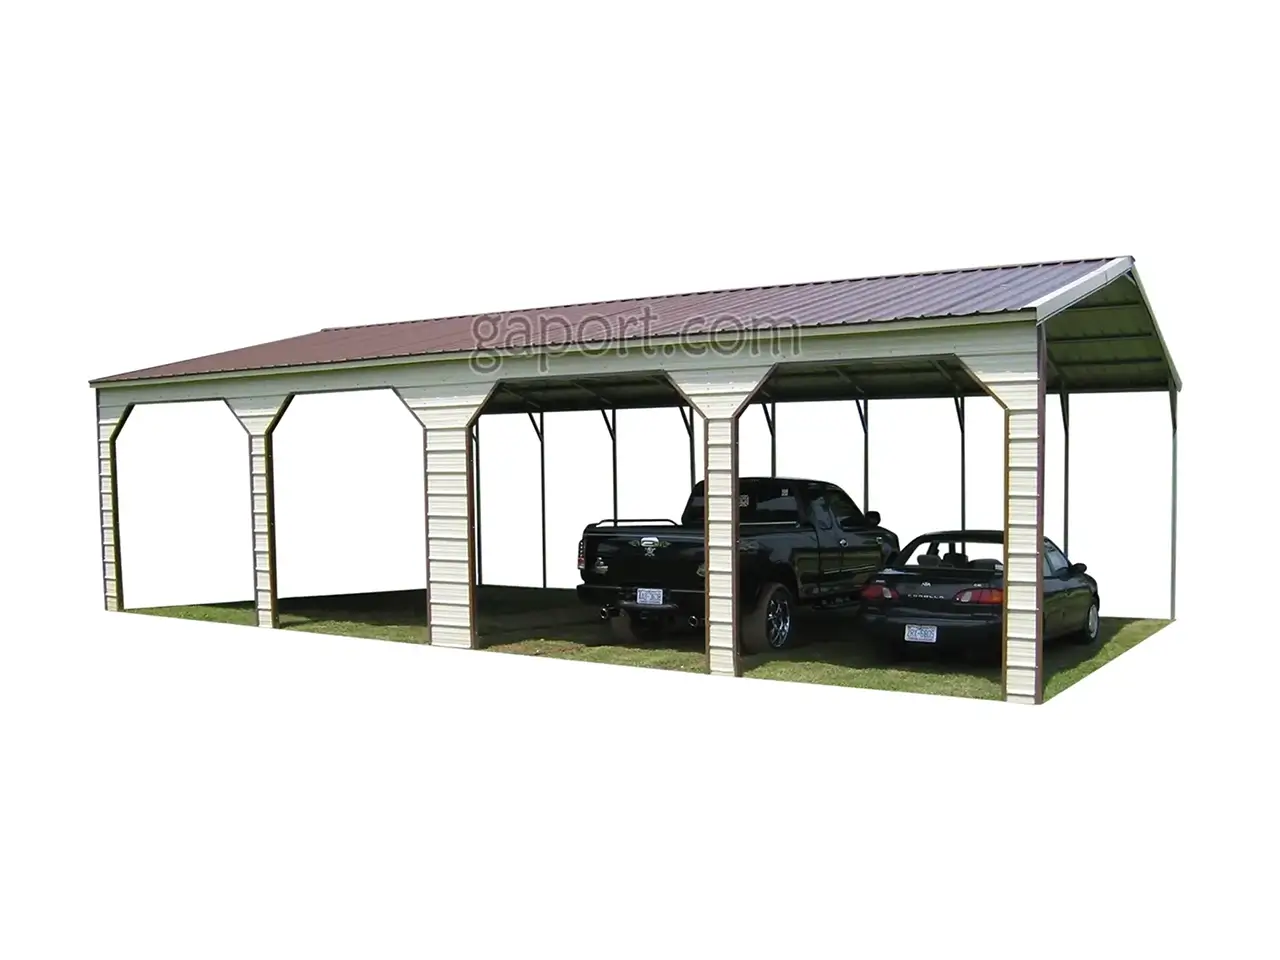 very interesting and unusual metal four car carport where the cars actually enter the side